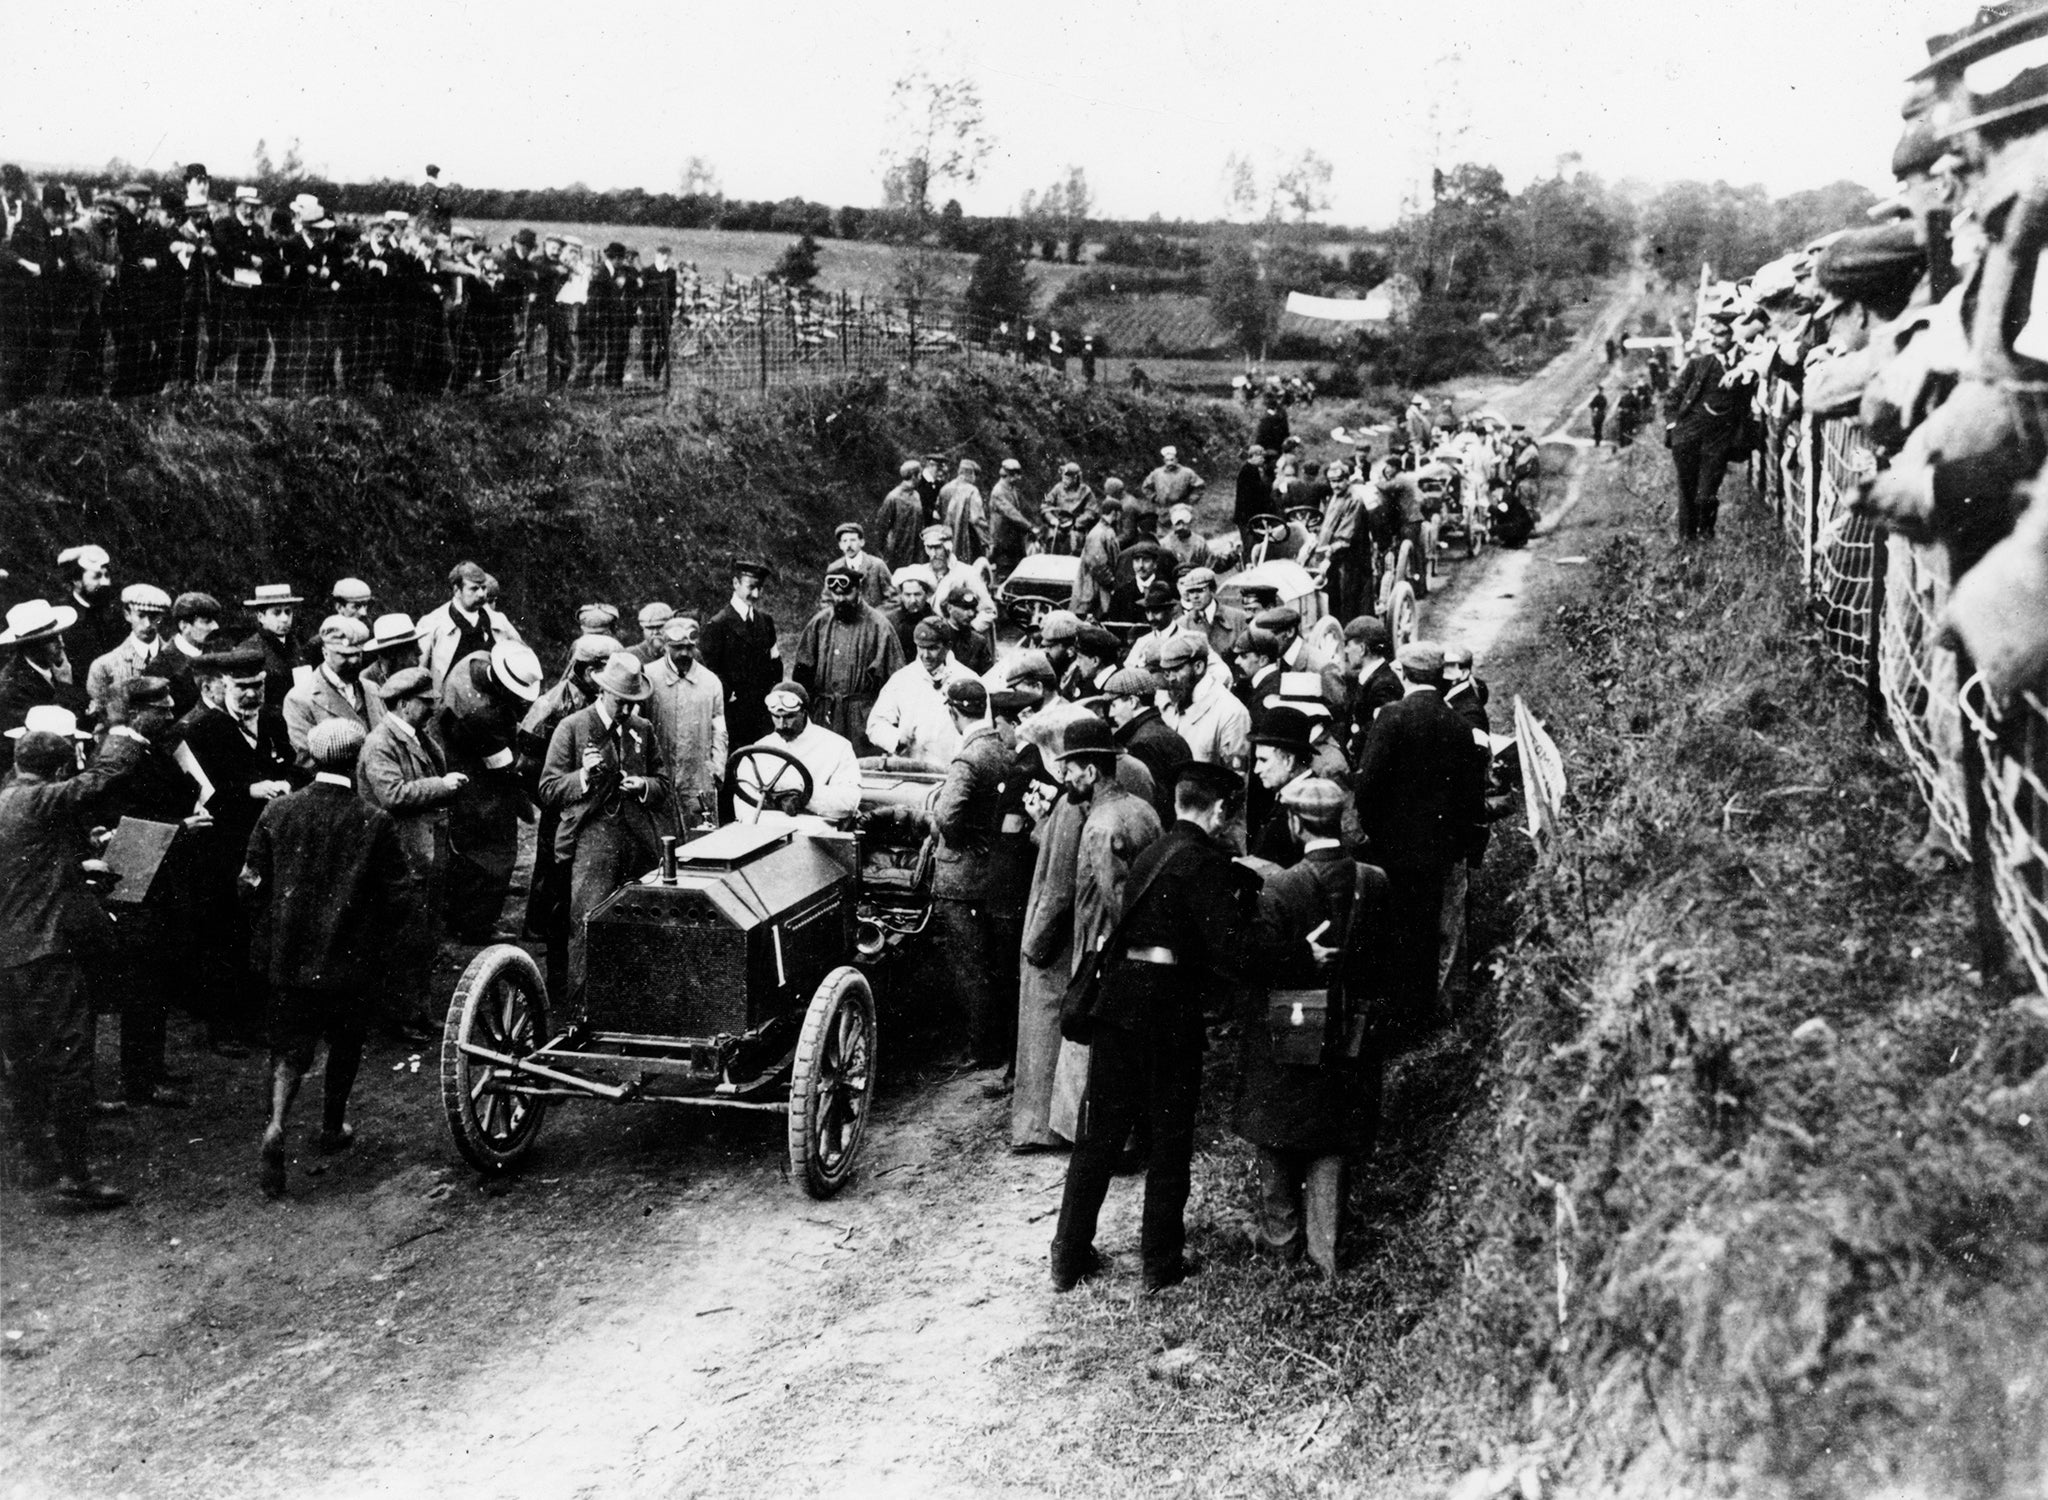 Selwyn Francis Edge in a Napier, 1903 Gordon Bennett race. The Gordon Bennett Races were organised by James Gordon Bennett, proprietor of the New York Herald newspaper to help promote the motor industry. The first race was held between Paris and Lyon in 1900, but in 1903 the race was staged on a circuit for the first time, at Athy in Ireland. The Gordon Bennett Races are regarded as the birth of the idea of Grand Prix motor racing. Selwyn Francis Edge was disqualified from the 1903 race for receiving a push start, having won the previous year's event. (Photo by National Motor Museum/Heritage Images/Getty Images)